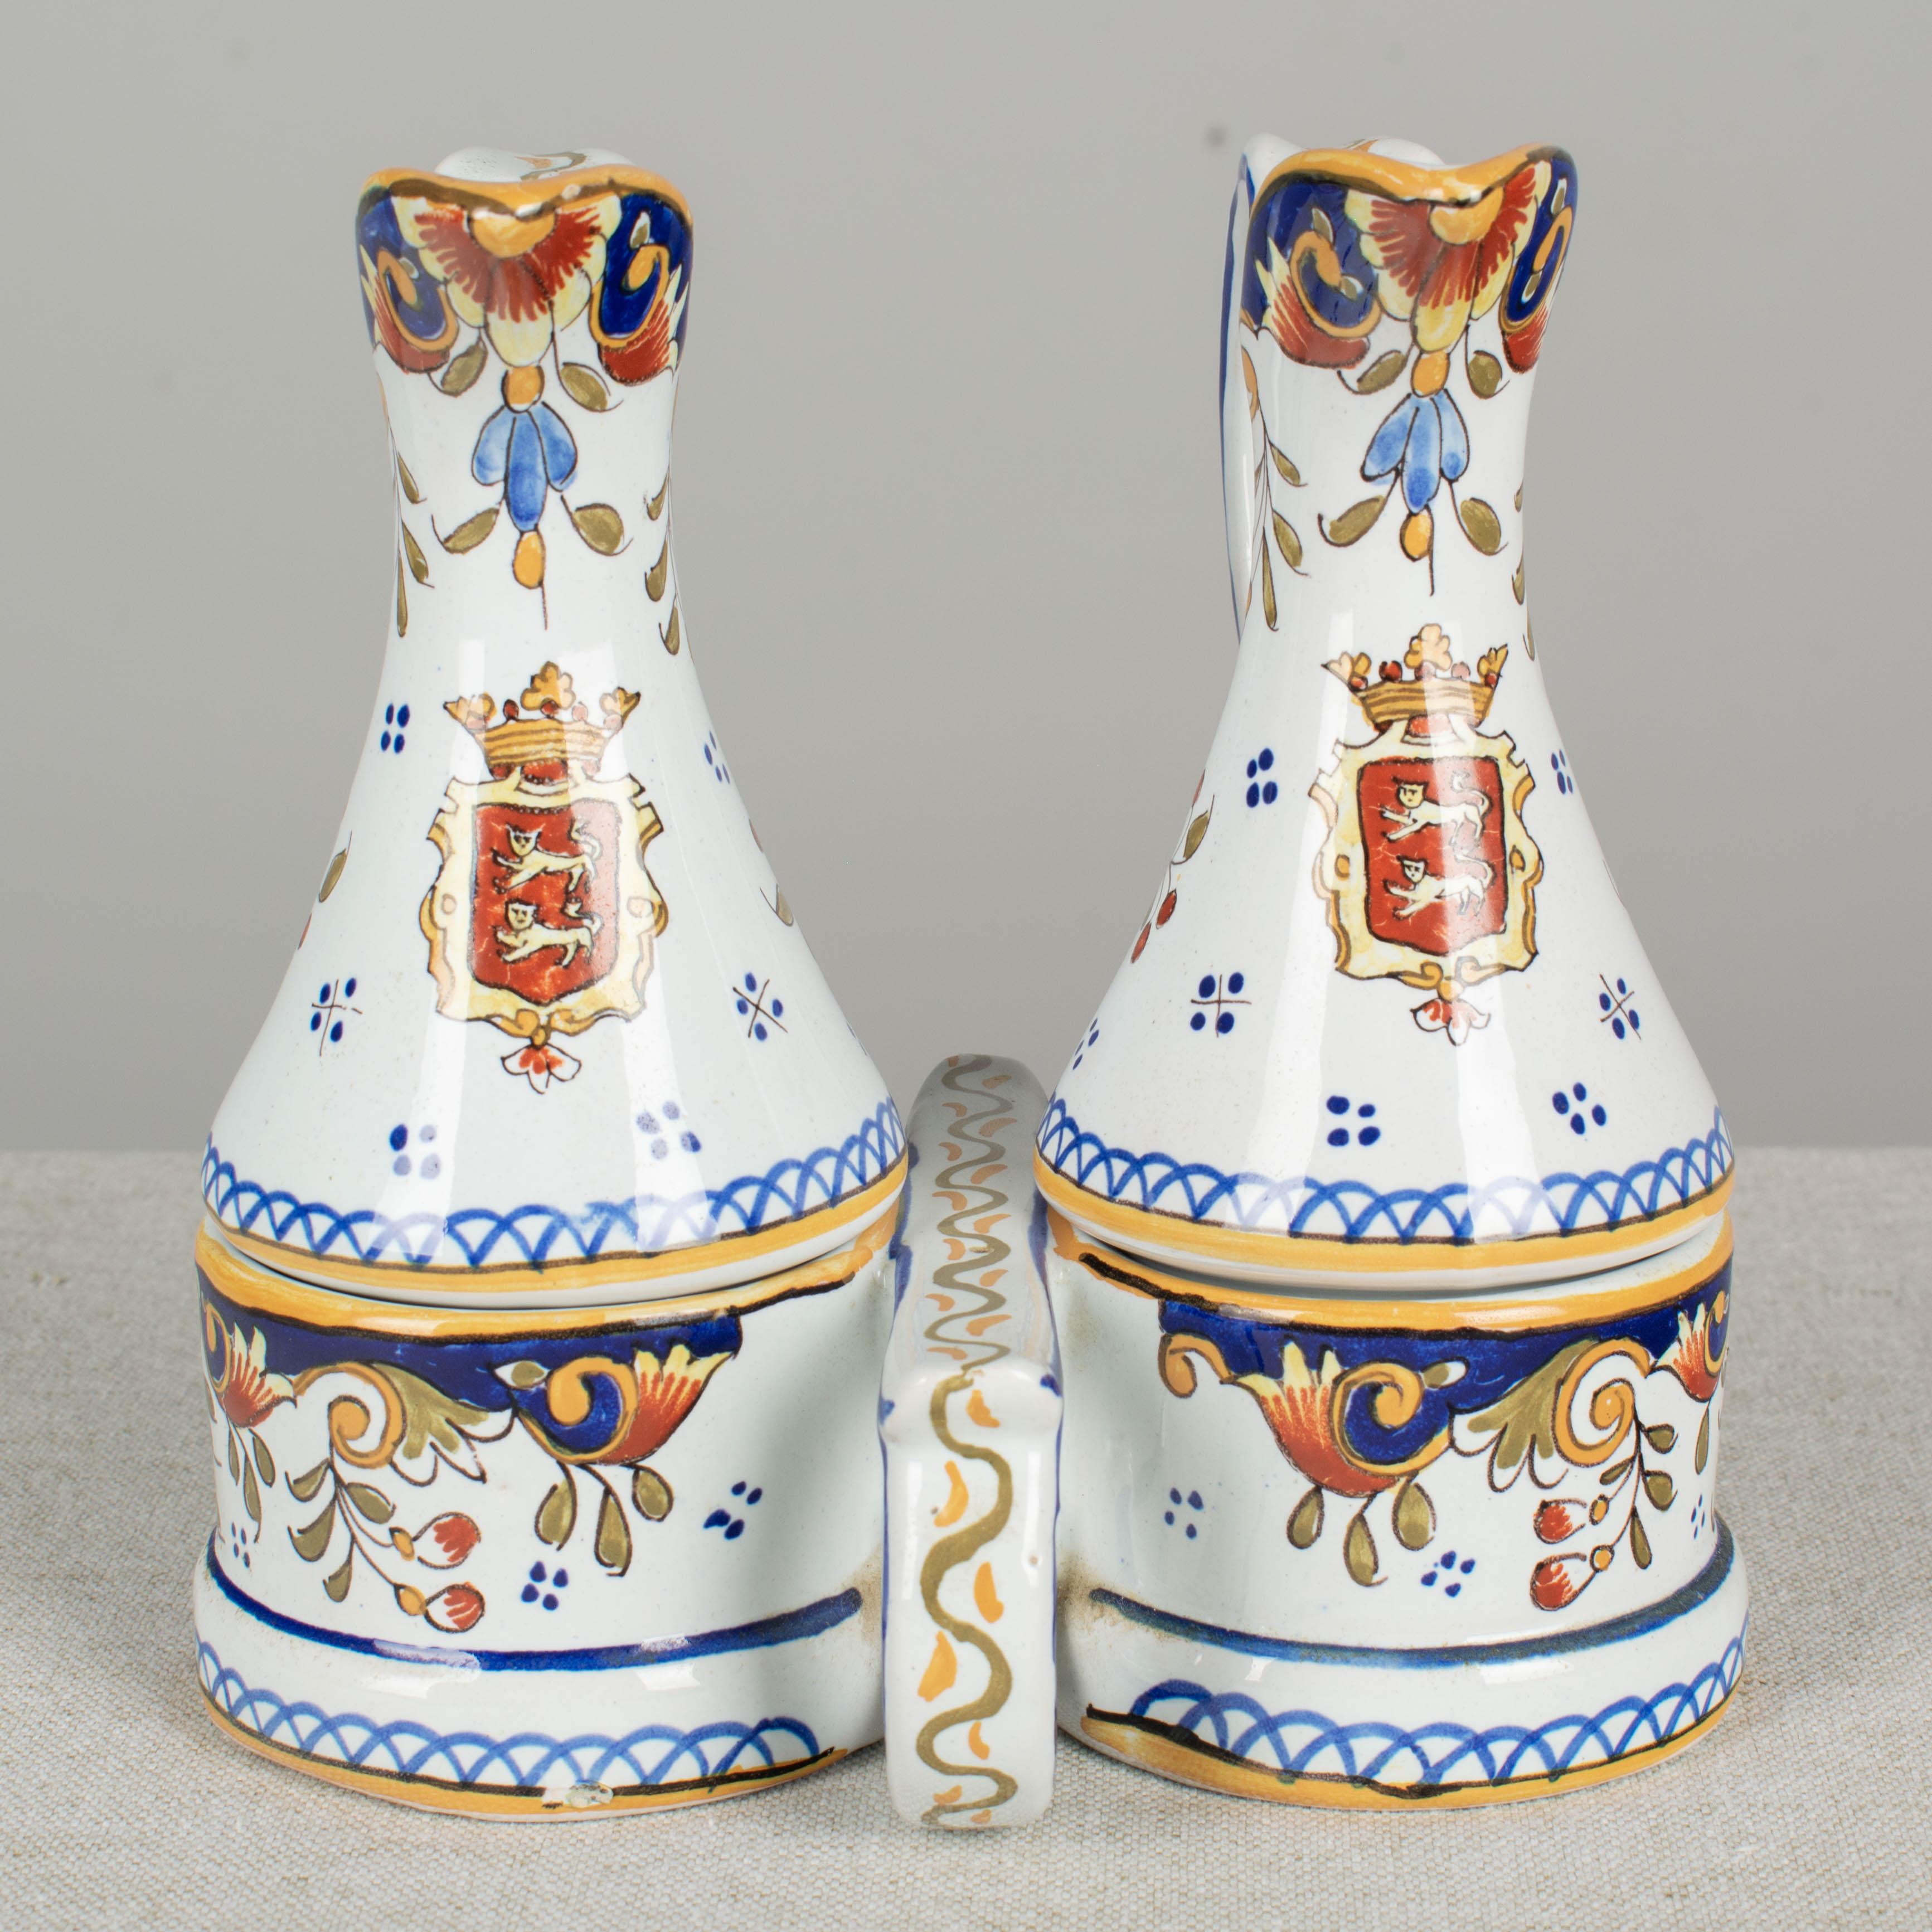 French Desvres Faience Cruet Set In Good Condition For Sale In Winter Park, FL